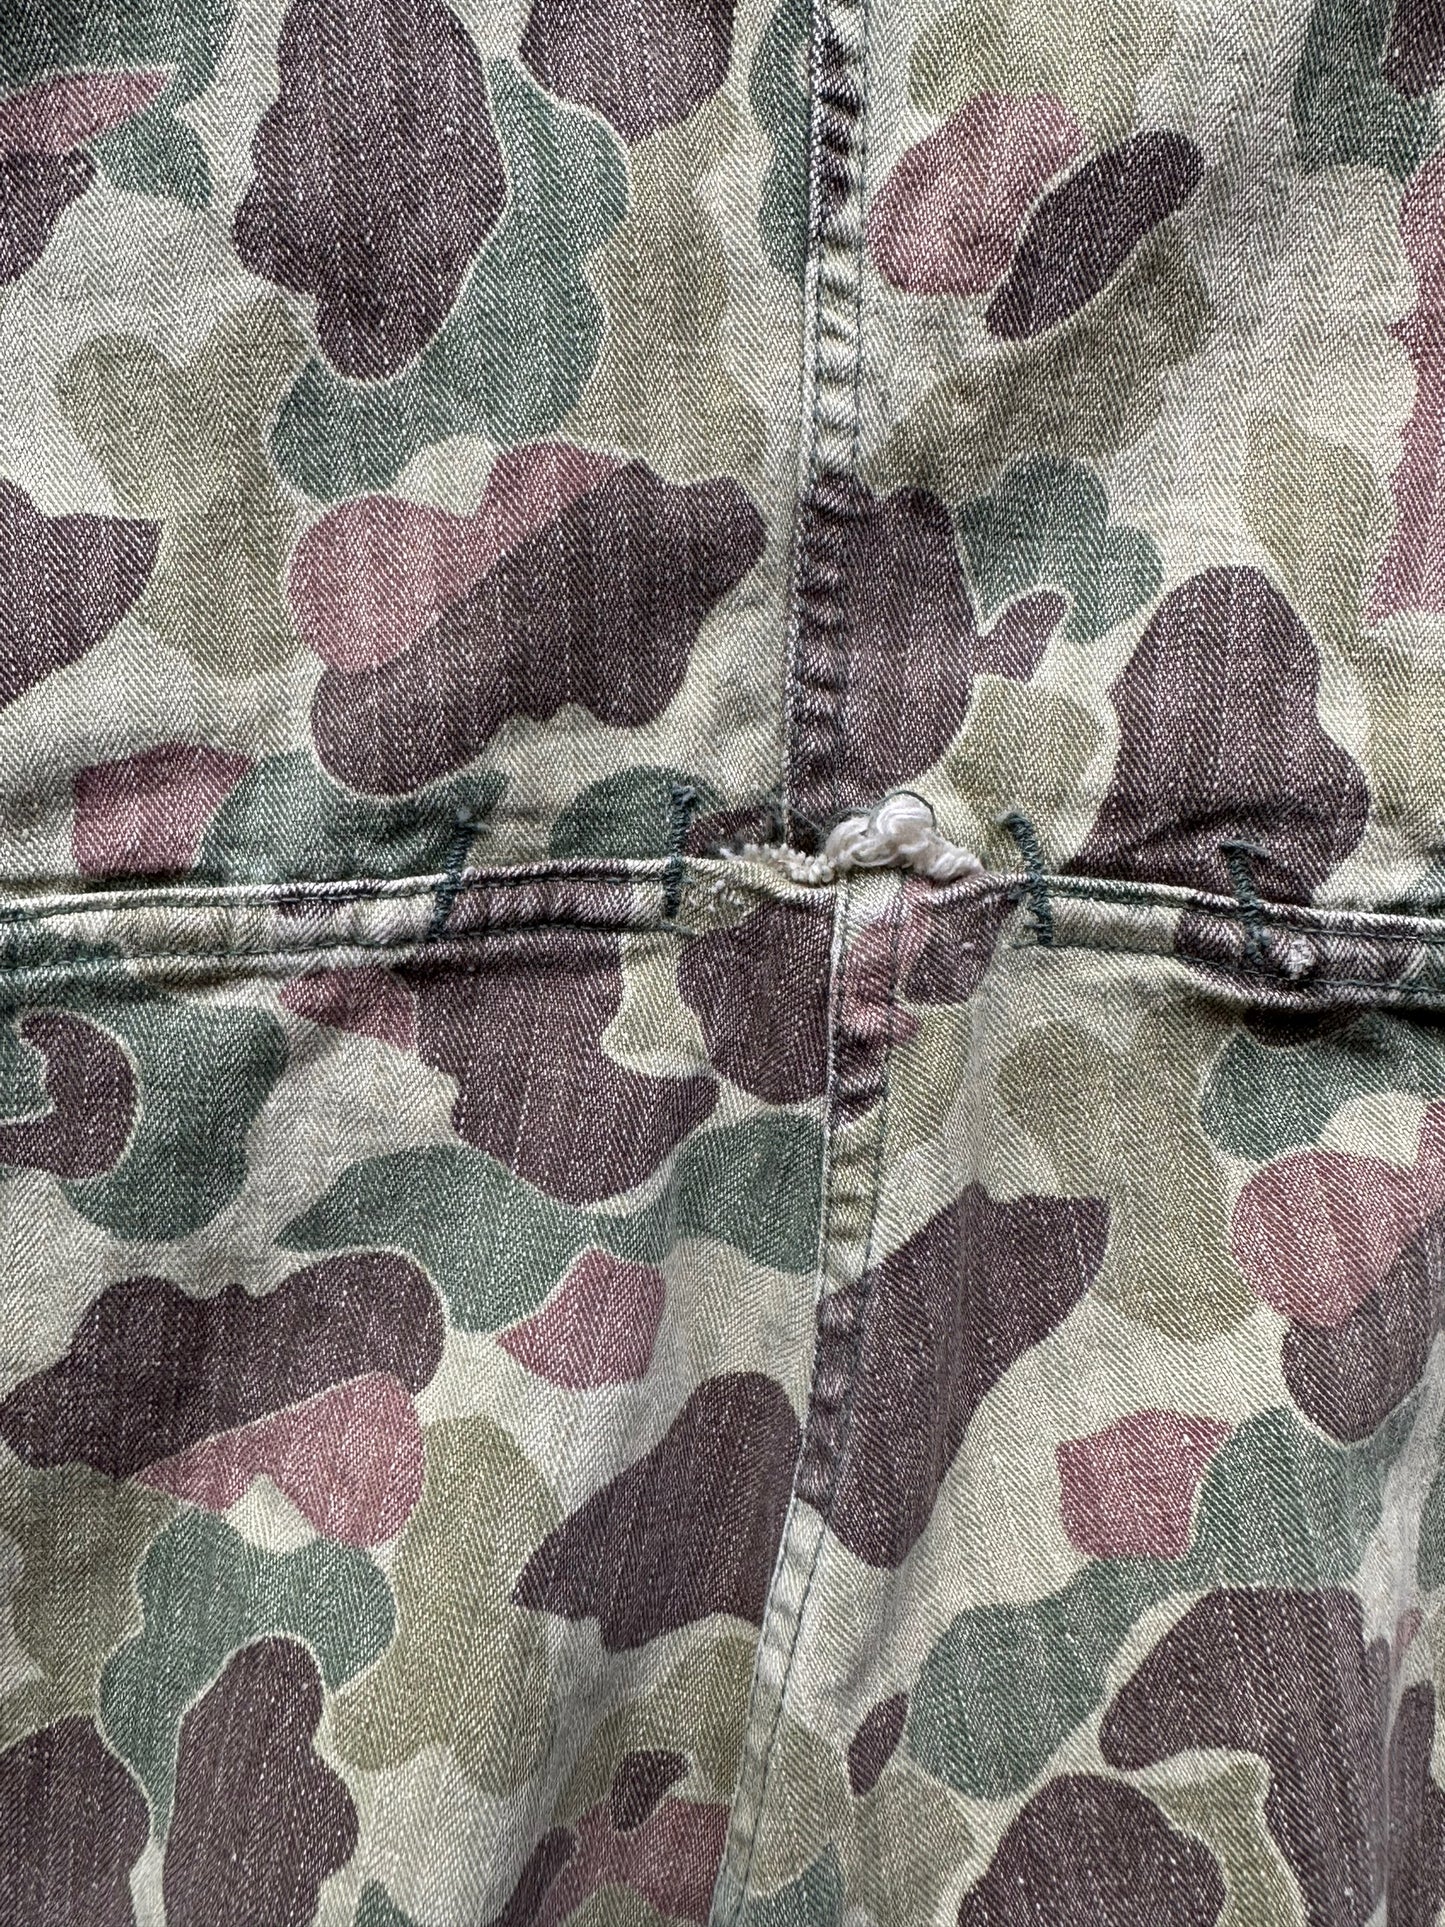 Small Hole in Seam of Vintage M-4395 HBT Frogskin Camo Coveralls SZ M | Vintage Frog Skin Camo Pants Seattle | Barn Owl Vintage Workwear